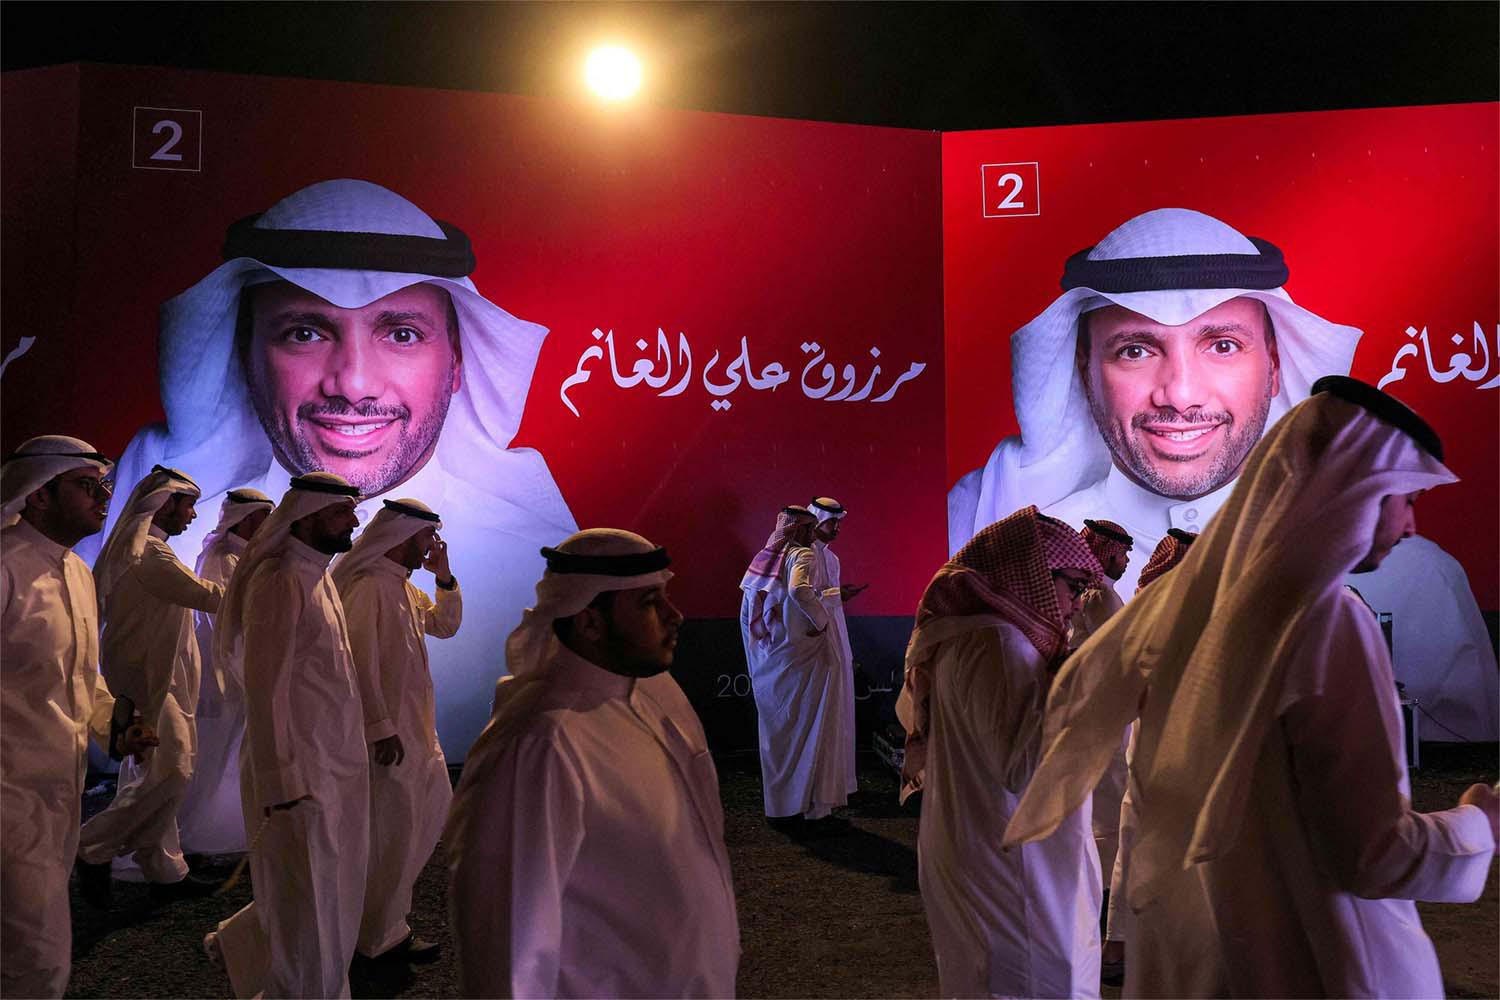 Kuwait's last election was in September 2022